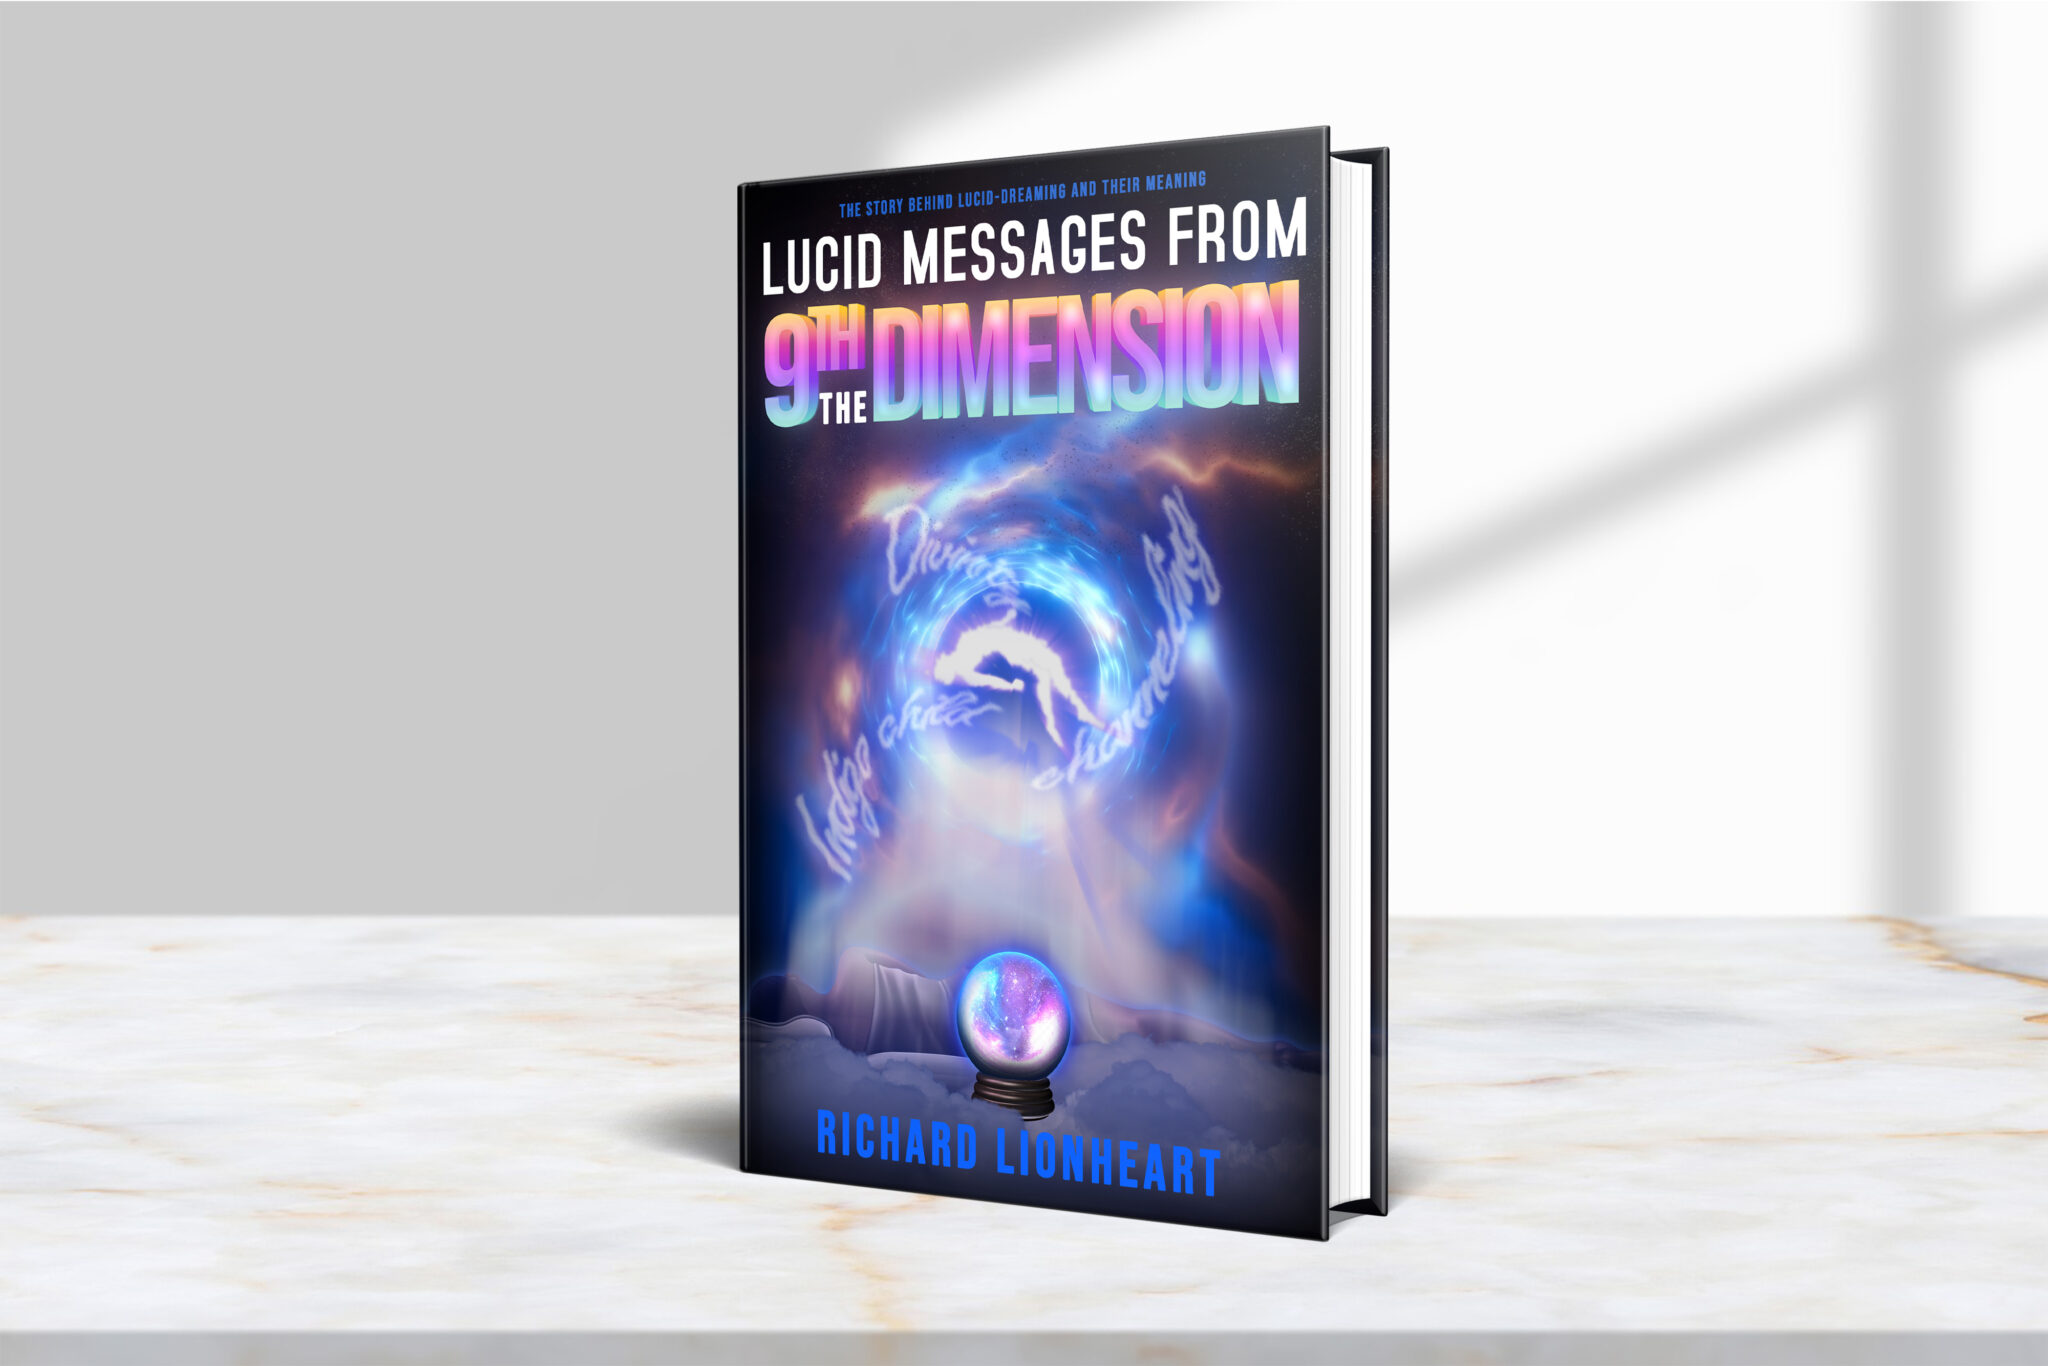 Lucid Messages from the 9th dimension